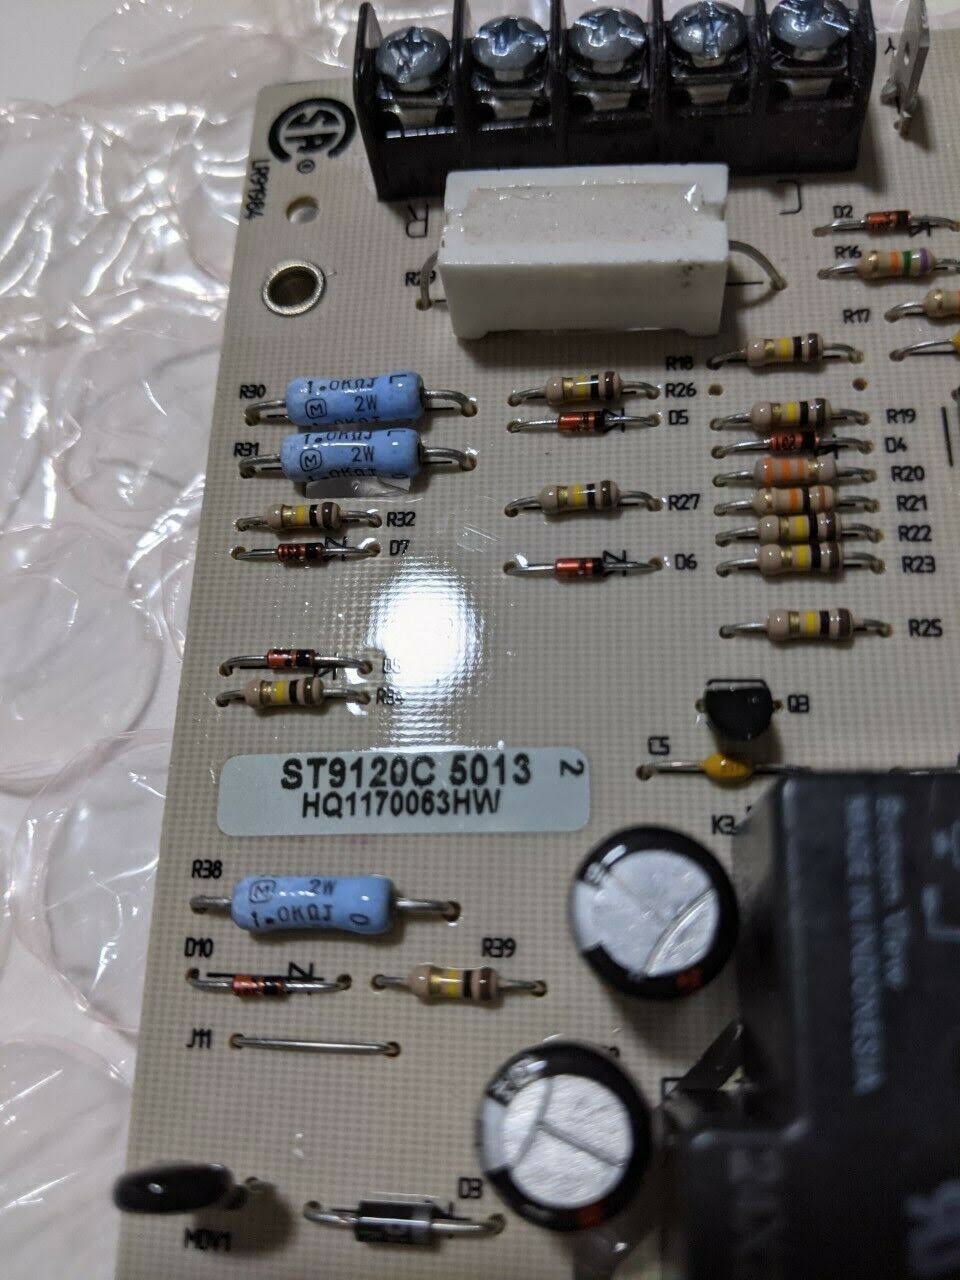 Honeywell ST9120C5013 / 1170063 Control Fan Timer Board Assembly. New!!